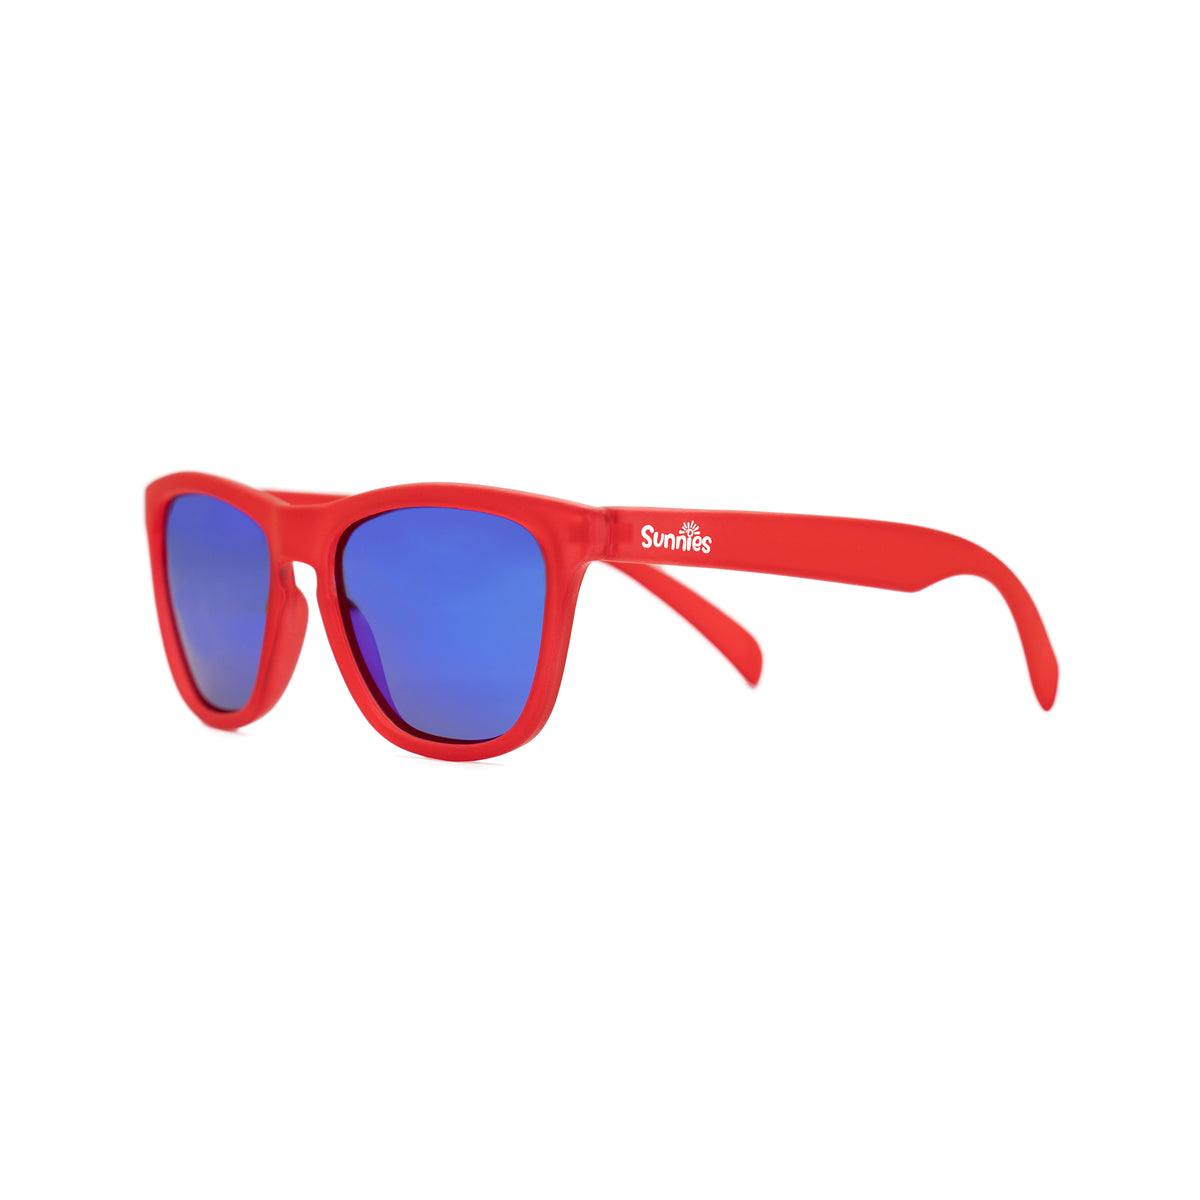 Polarized kids sunglasses in a transparent red frame and reflective blue lenses